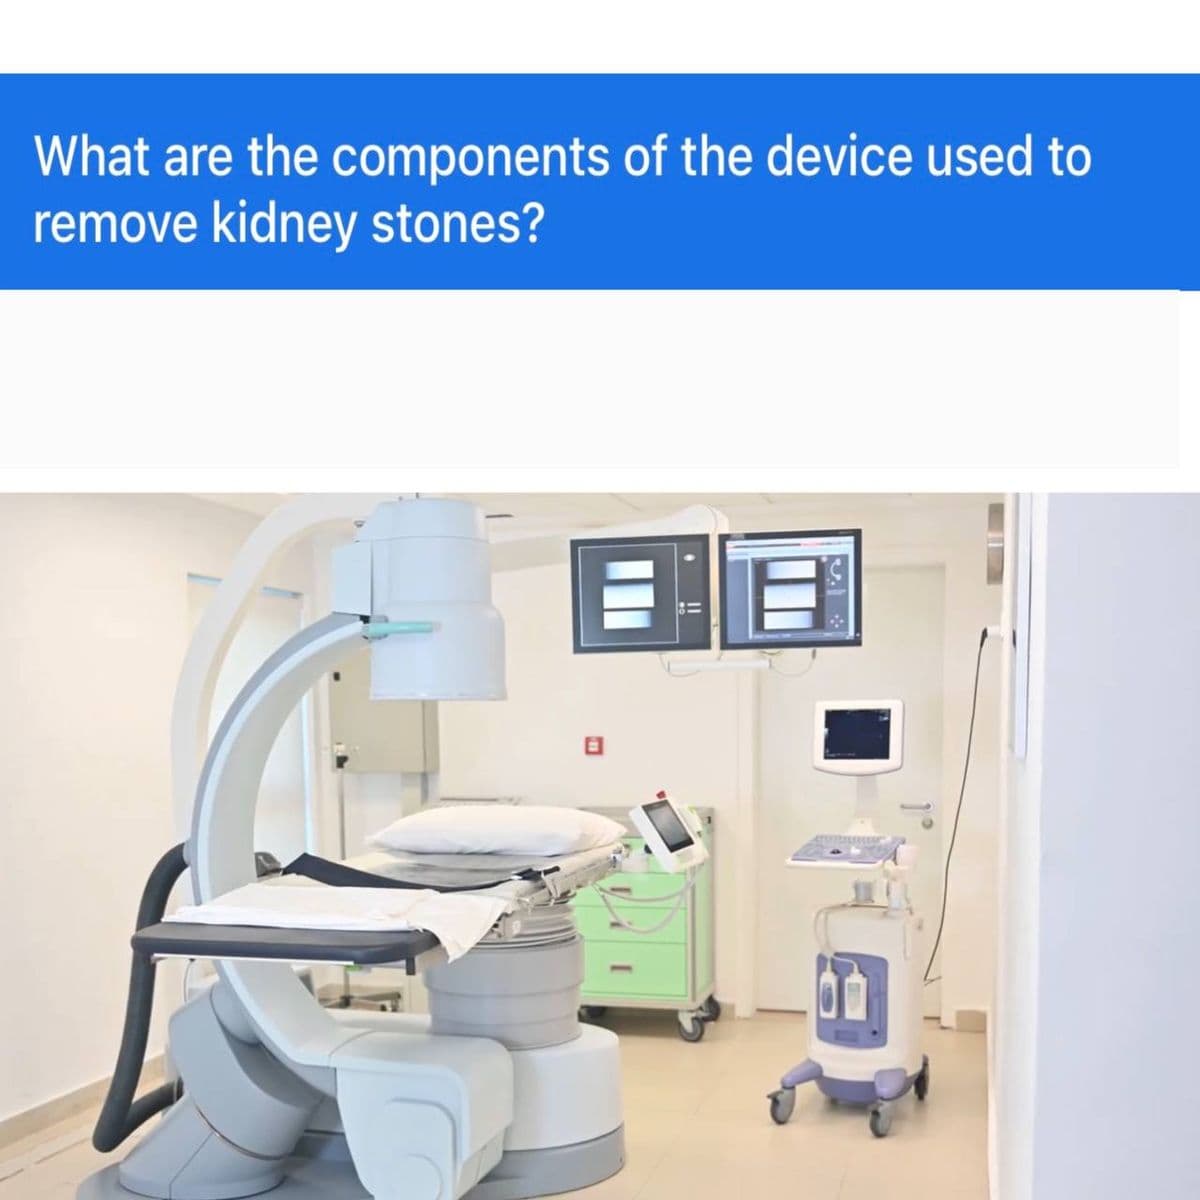 What are the components of the device used to
remove kidney stones?
an